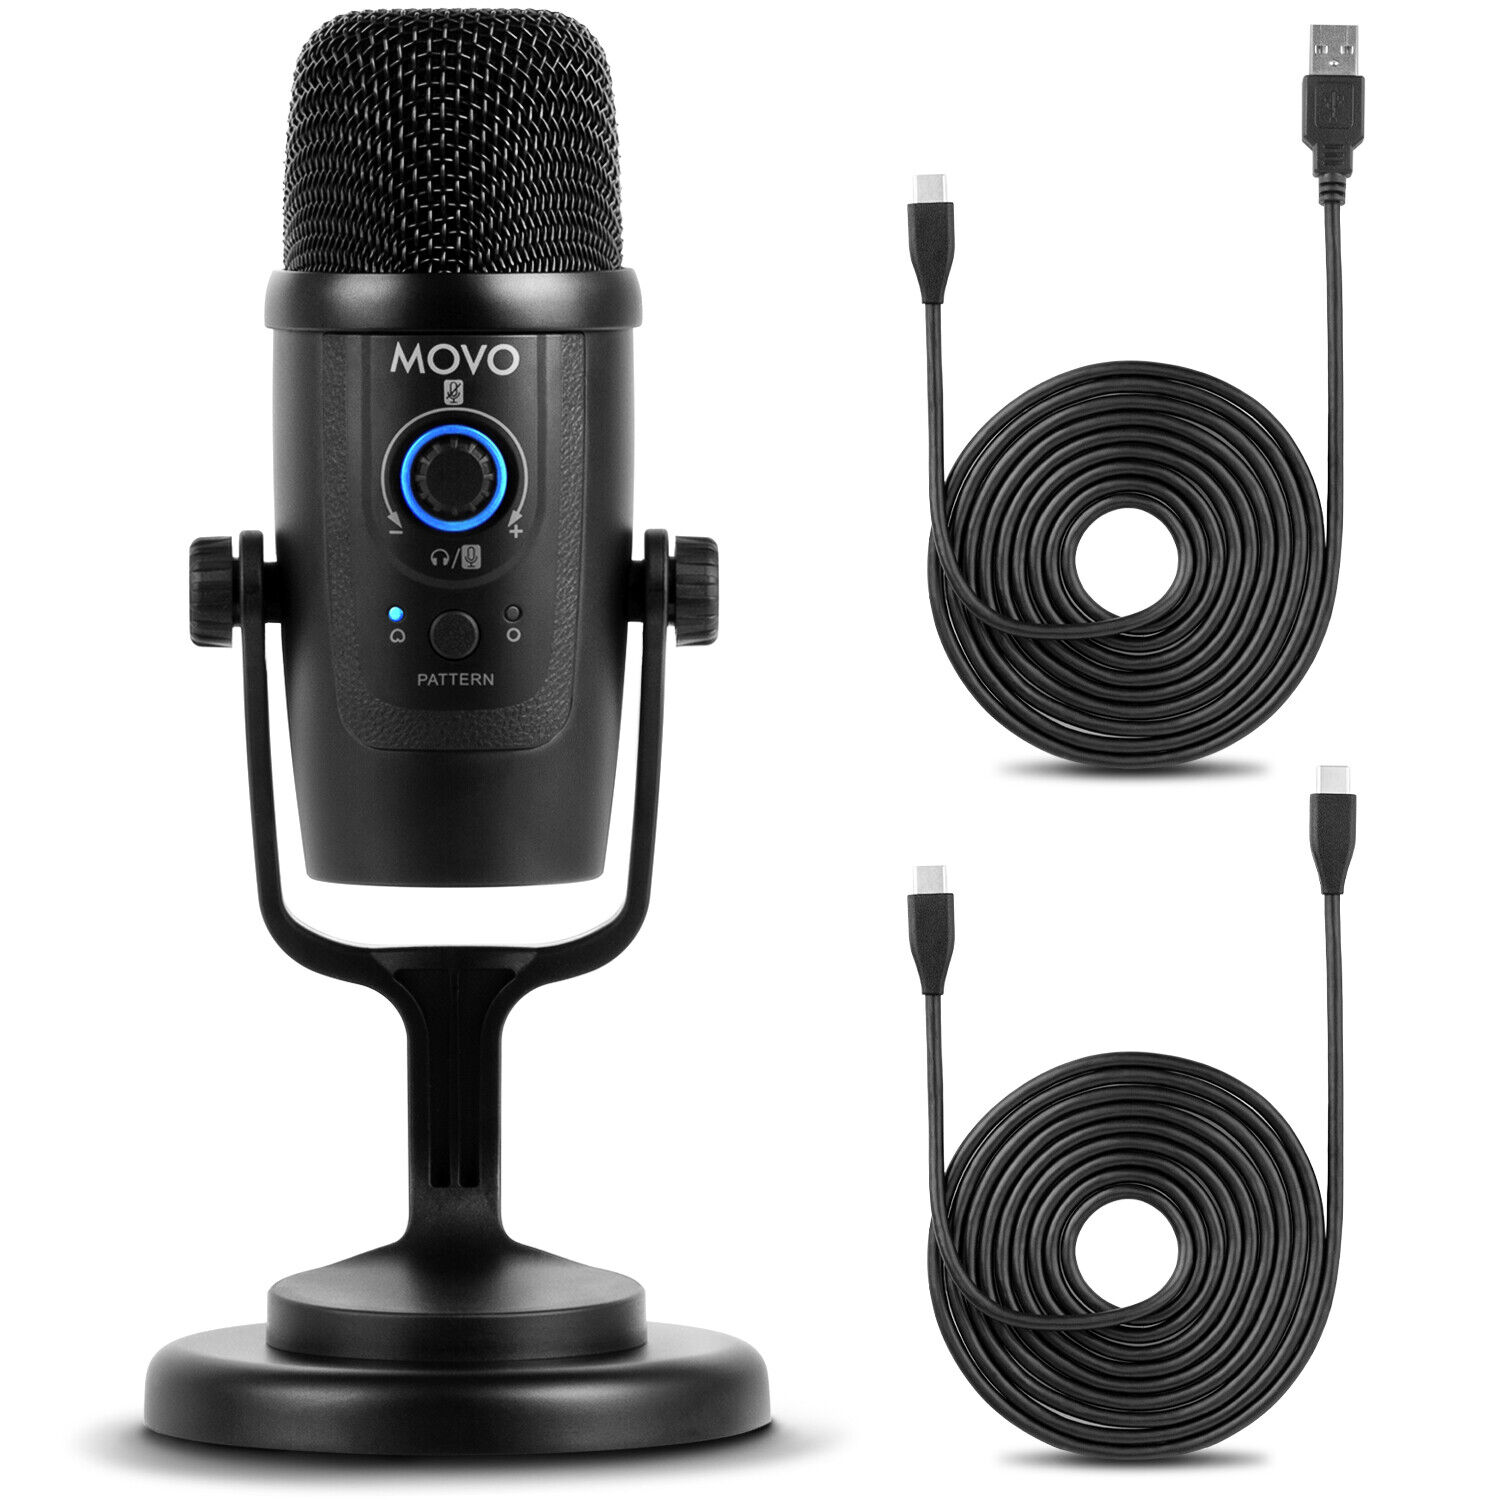 Movo UM300 Dual Pattern Desktop USB Microphone for Computer / Android Smartphone